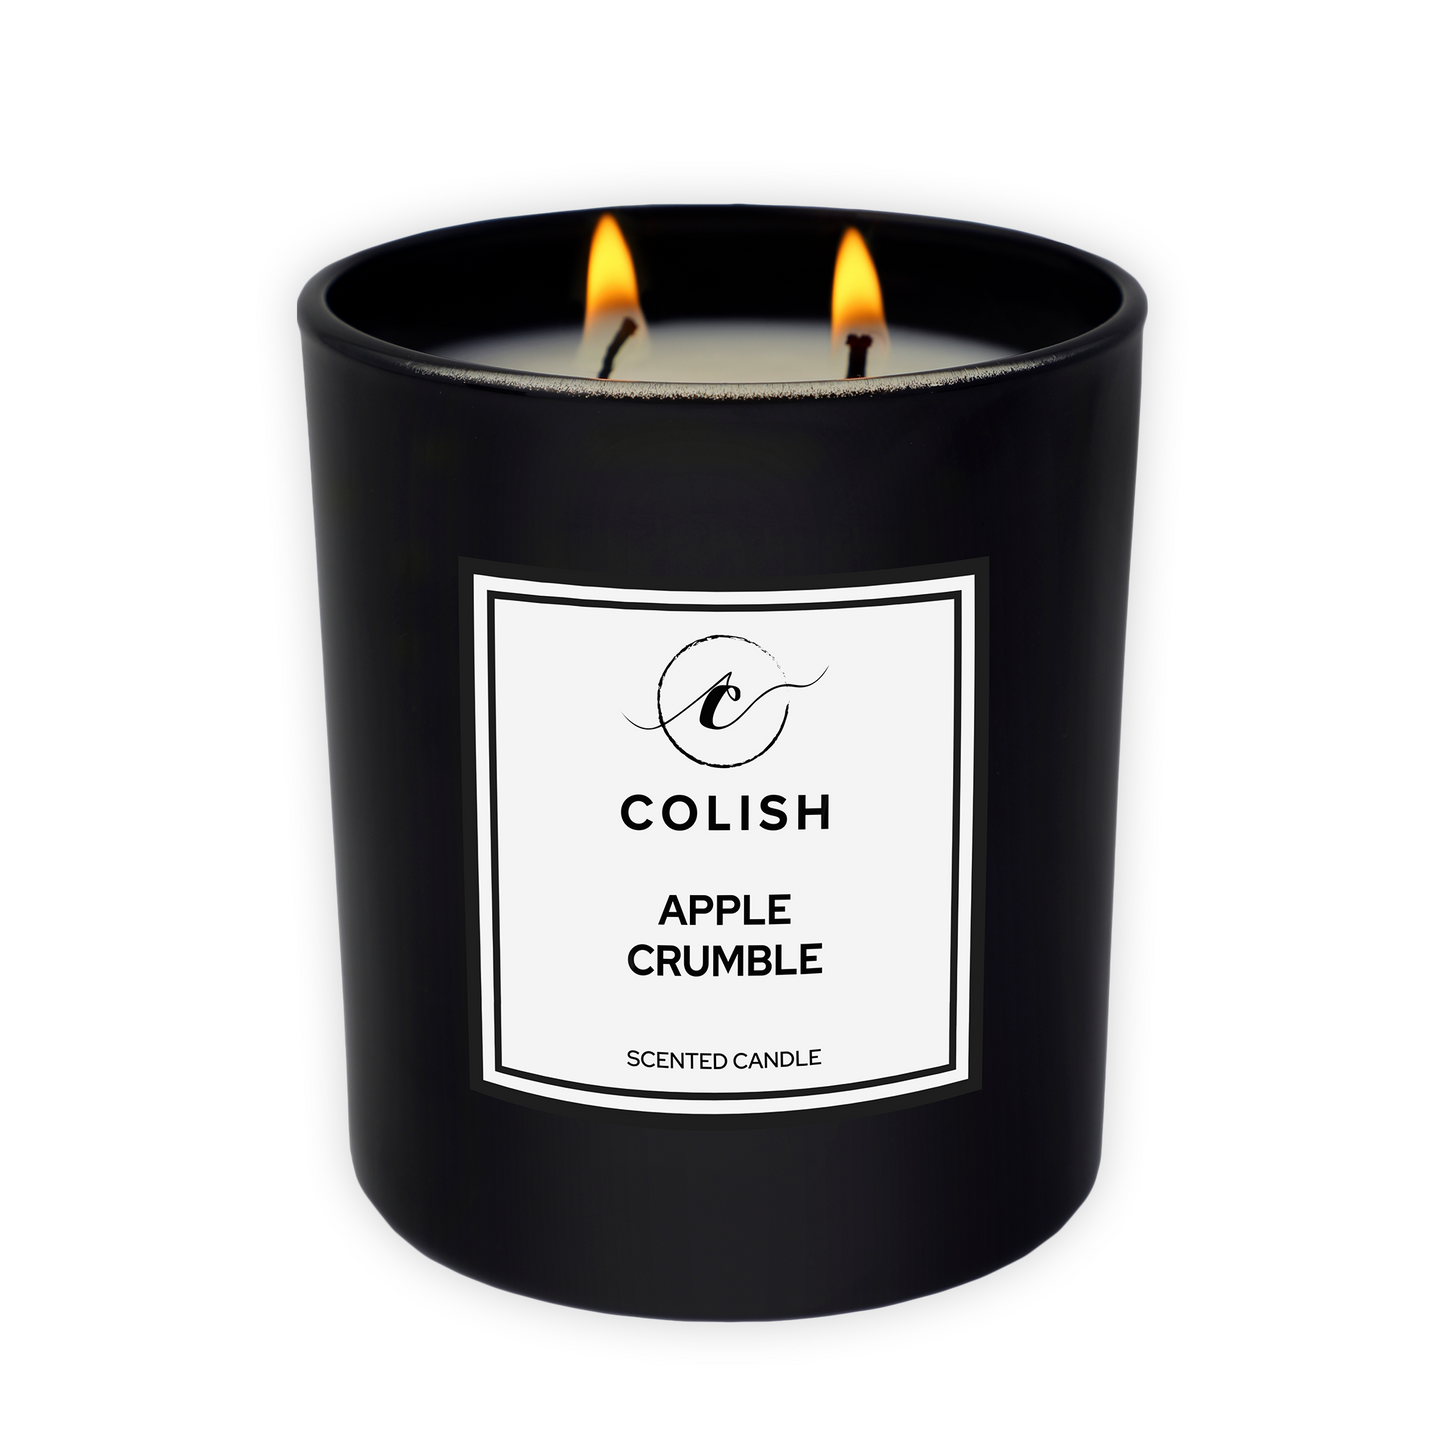 APPLE CRUMBLE SCENTED CANDLE